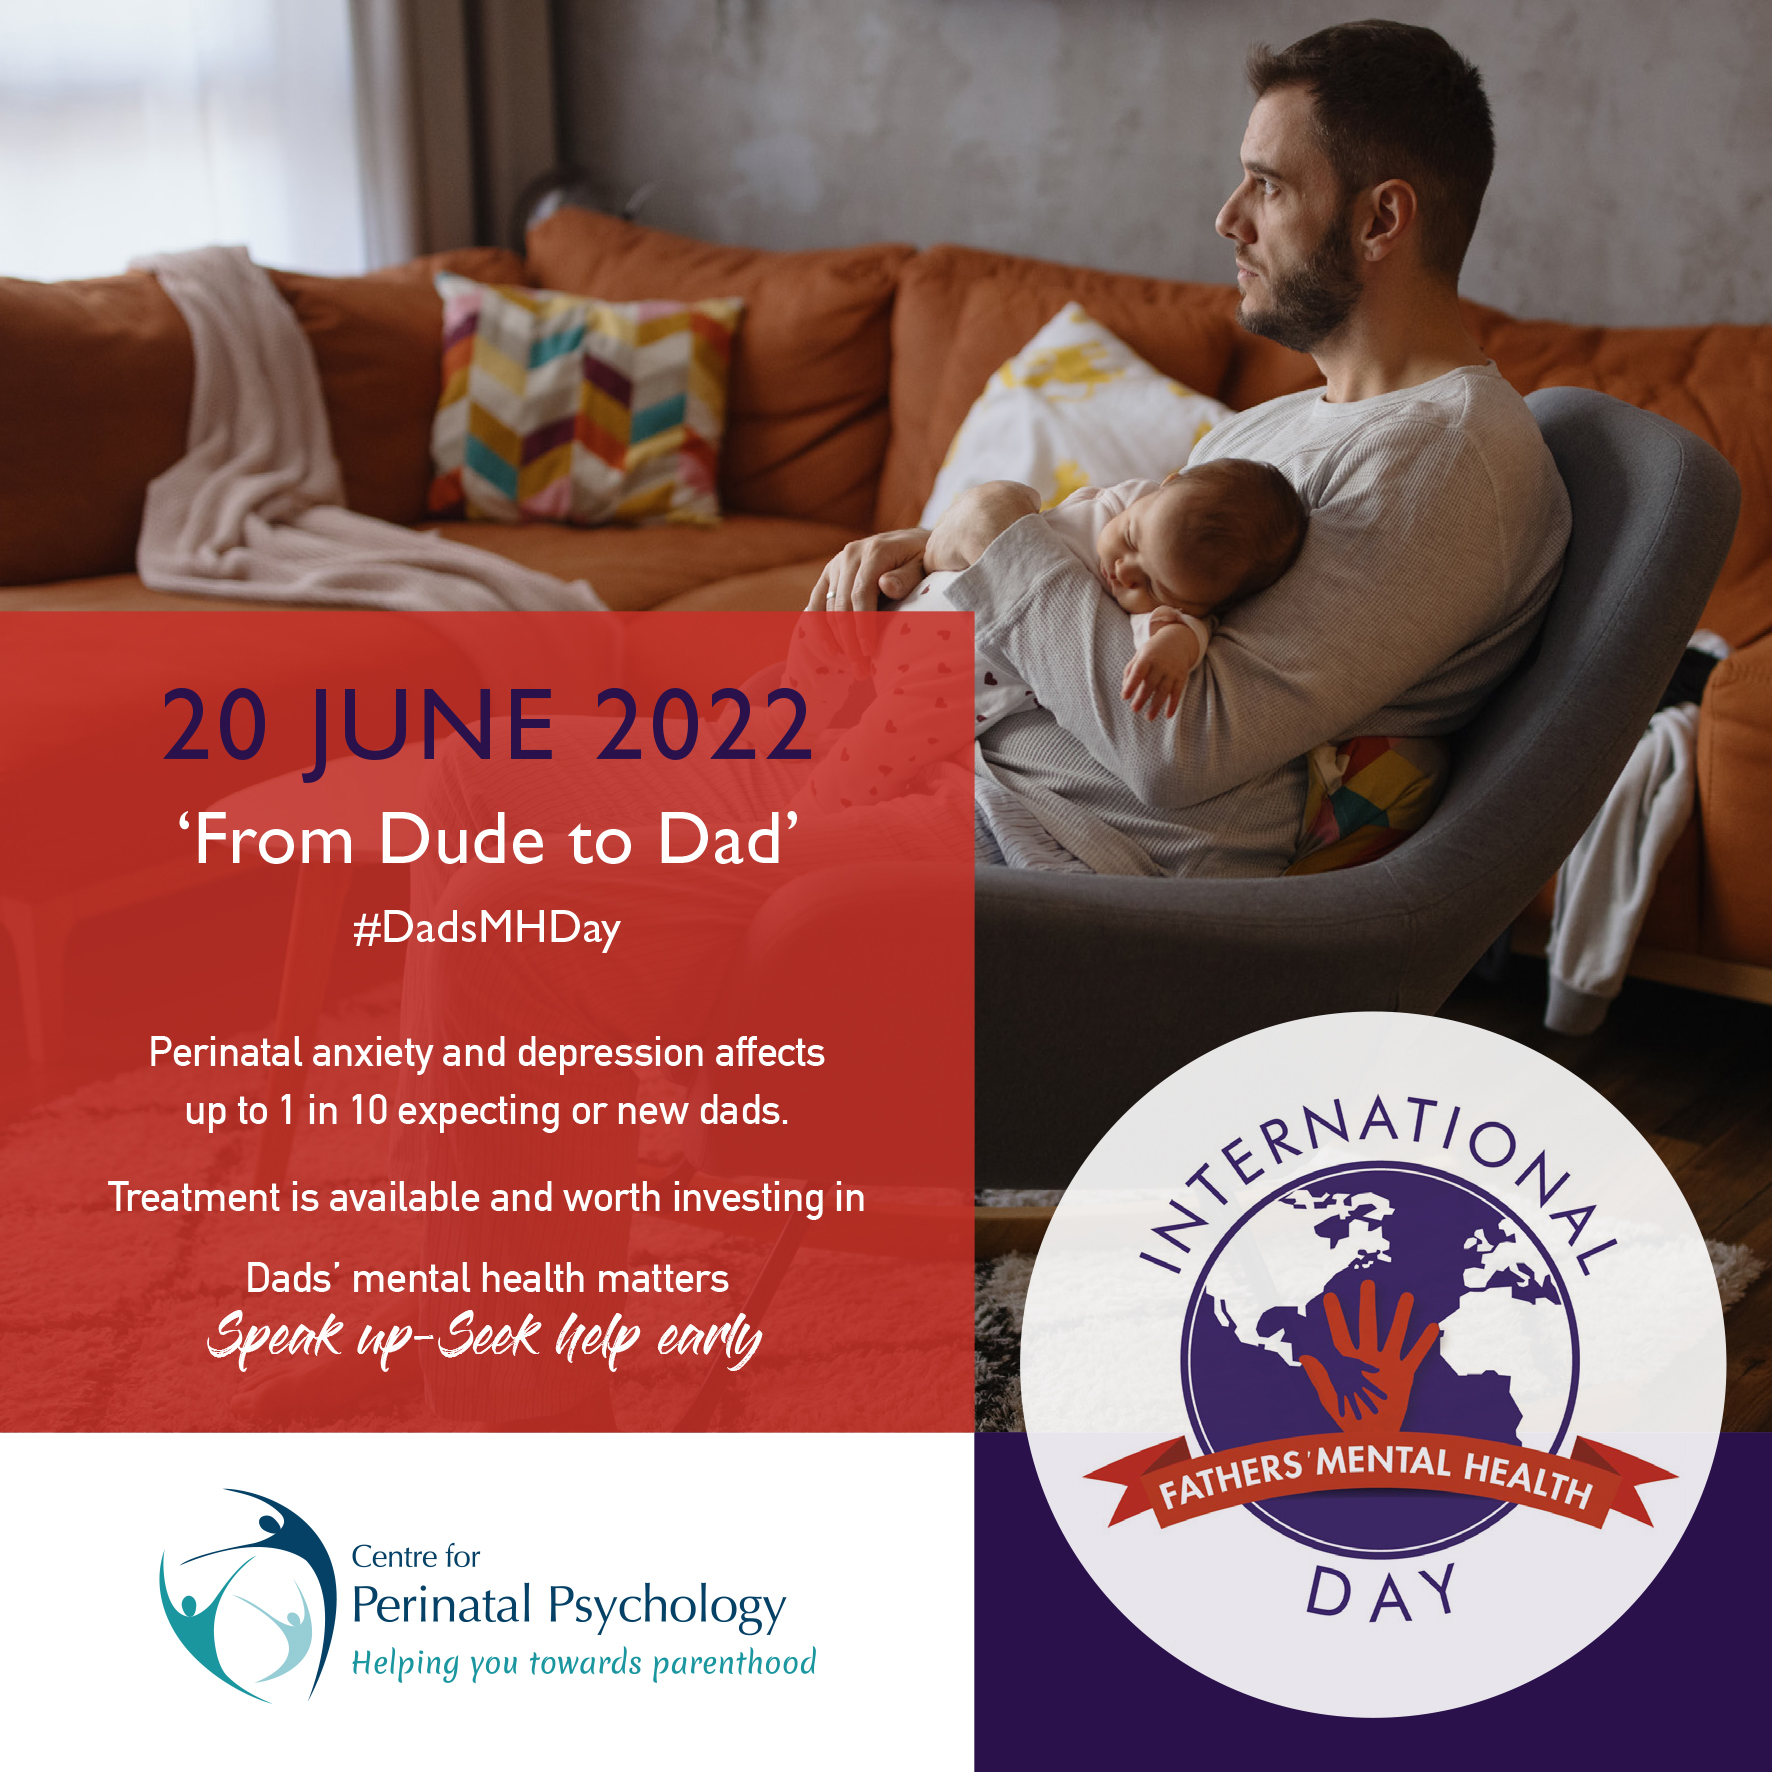 International Fathers' Mental Health Day Centre for Perinatal Psychology